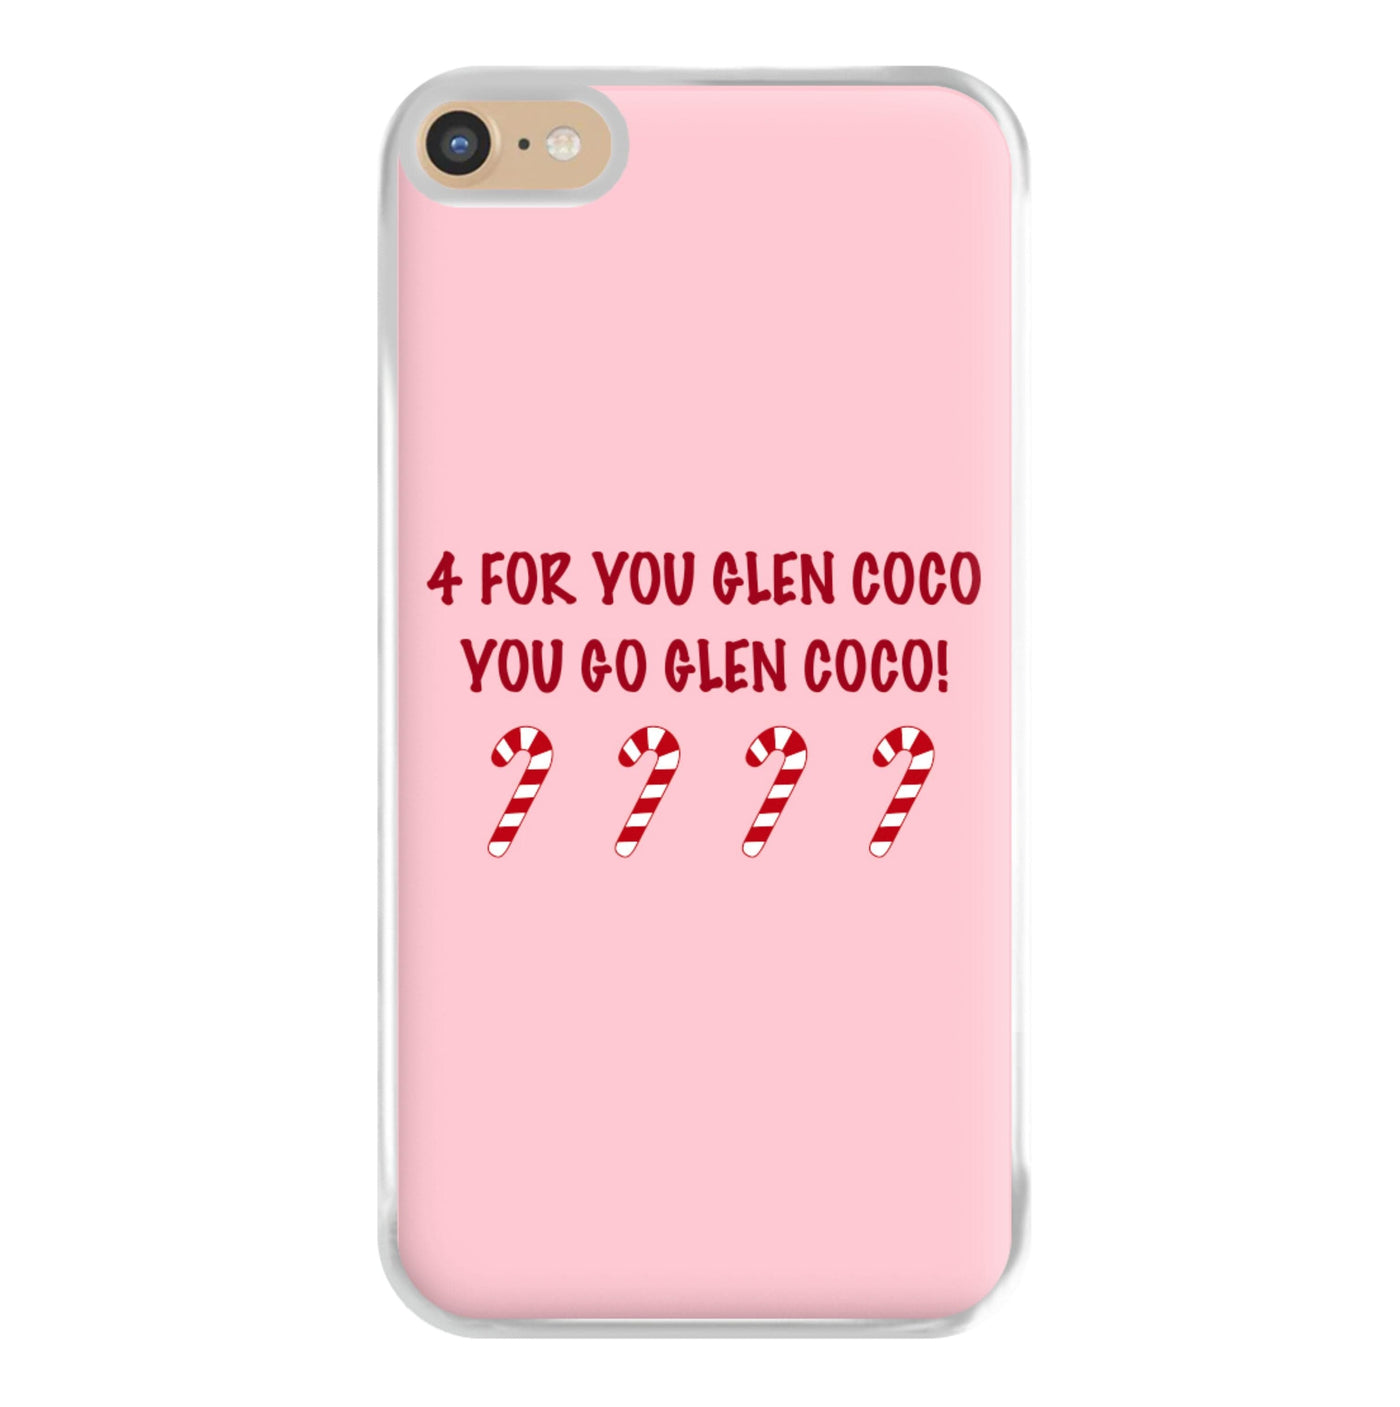 Four For You Glen Coco - Mean Girls Phone Case